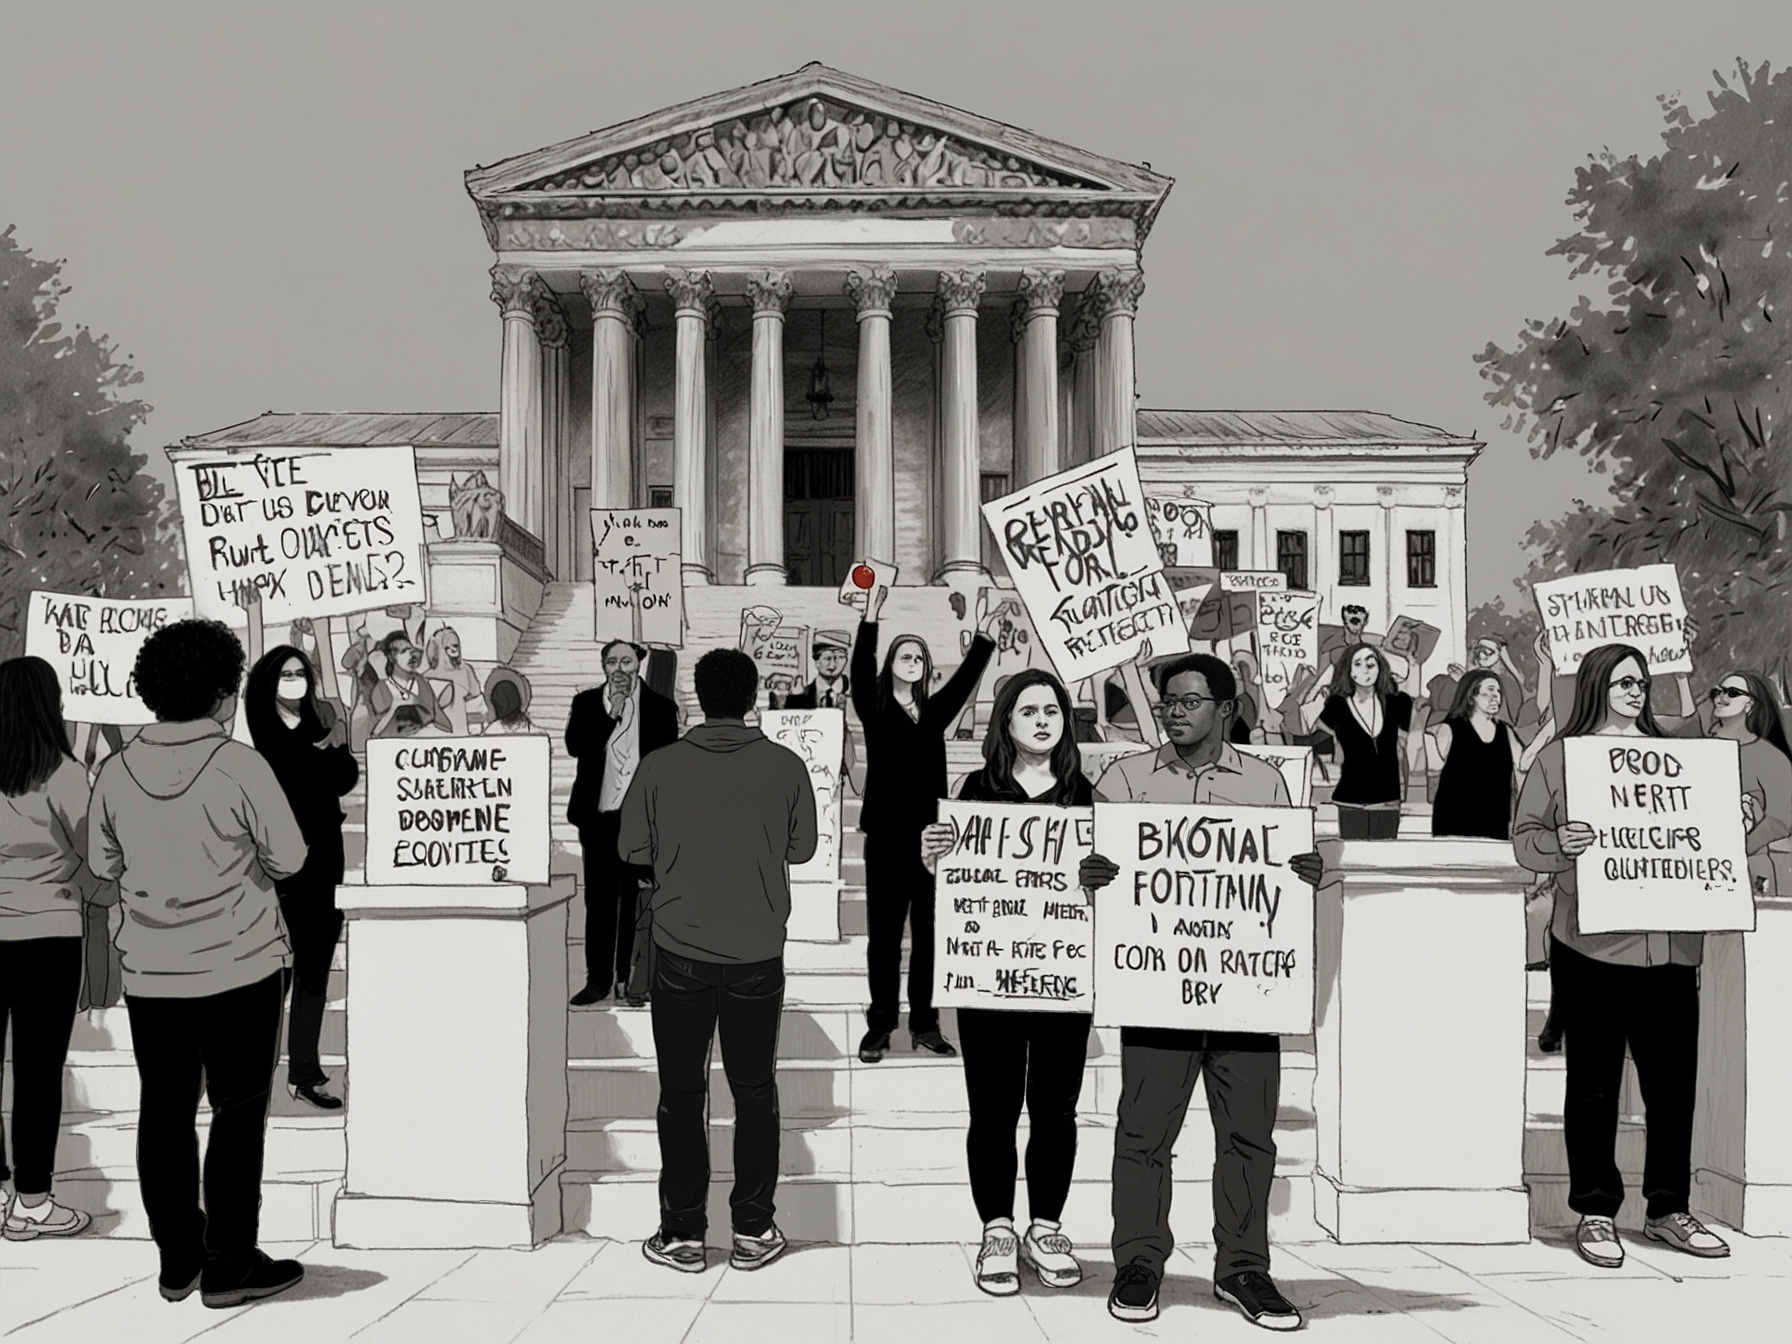 An illustration of protesters outside the Supreme Court, holding signs that showcase their dissatisfaction with recent rulings. The signs represent various contentious issues like reproductive rights and gun control.